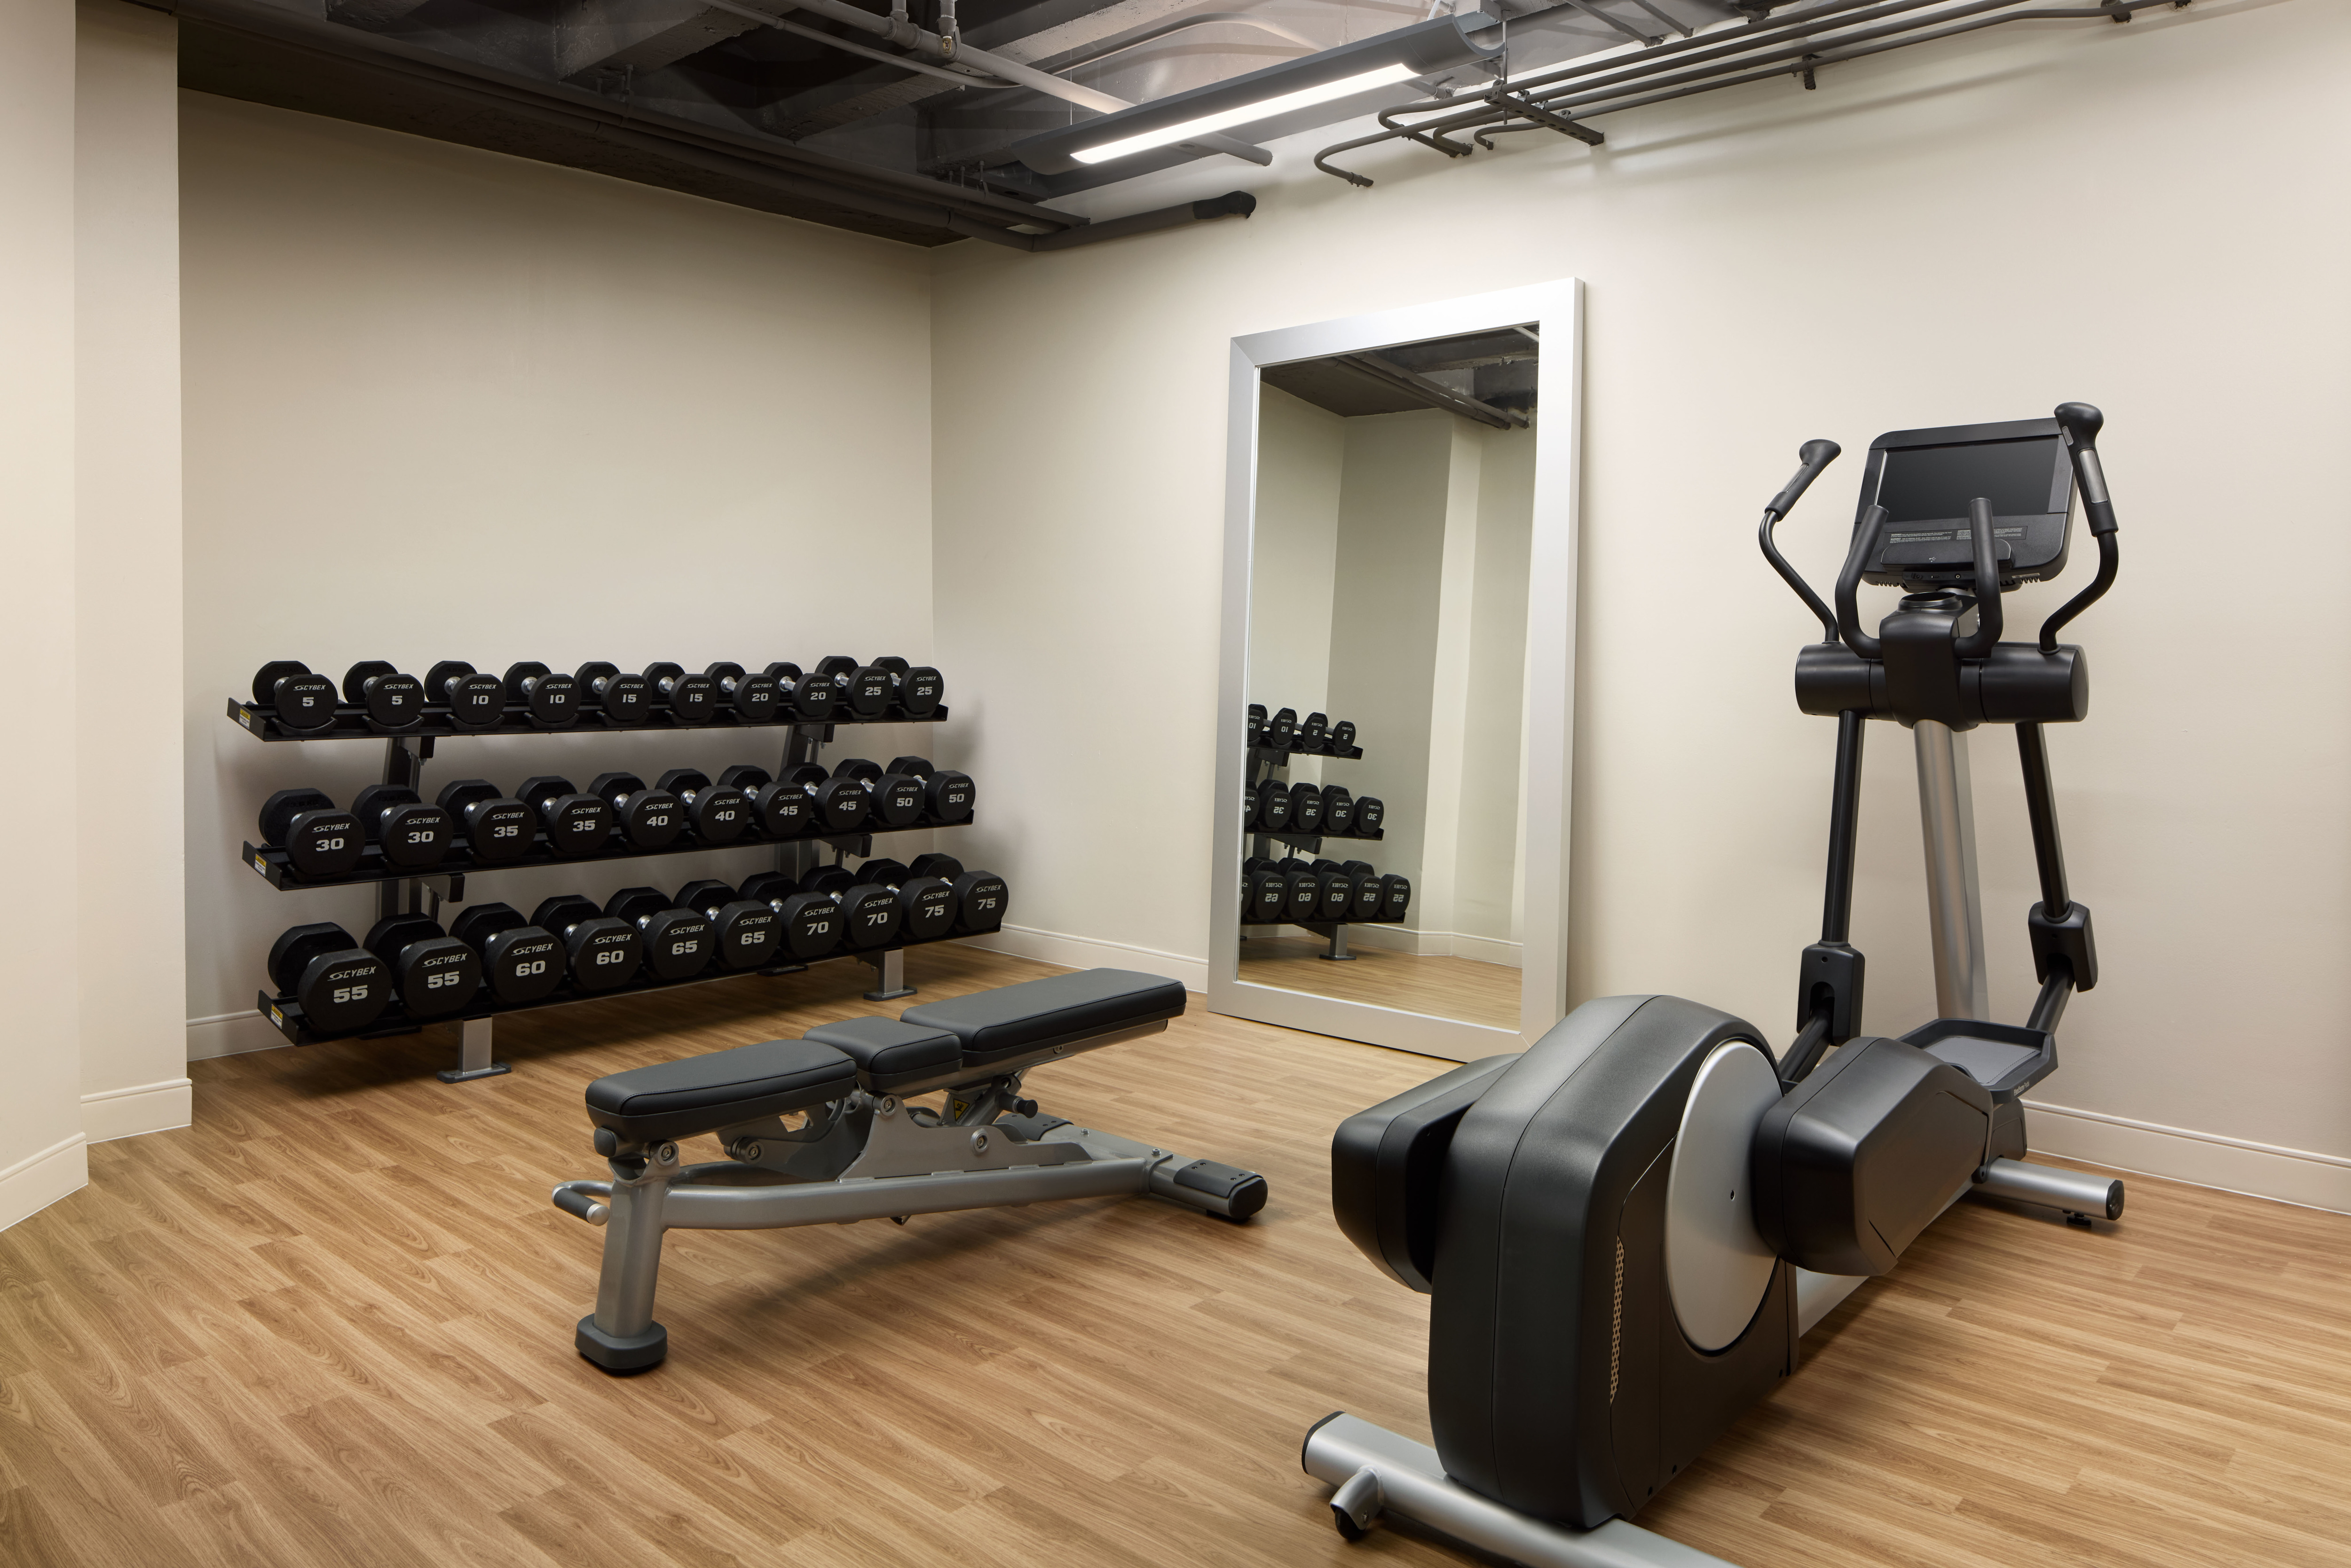 Elliptical Machine and Weights in Fitness Center